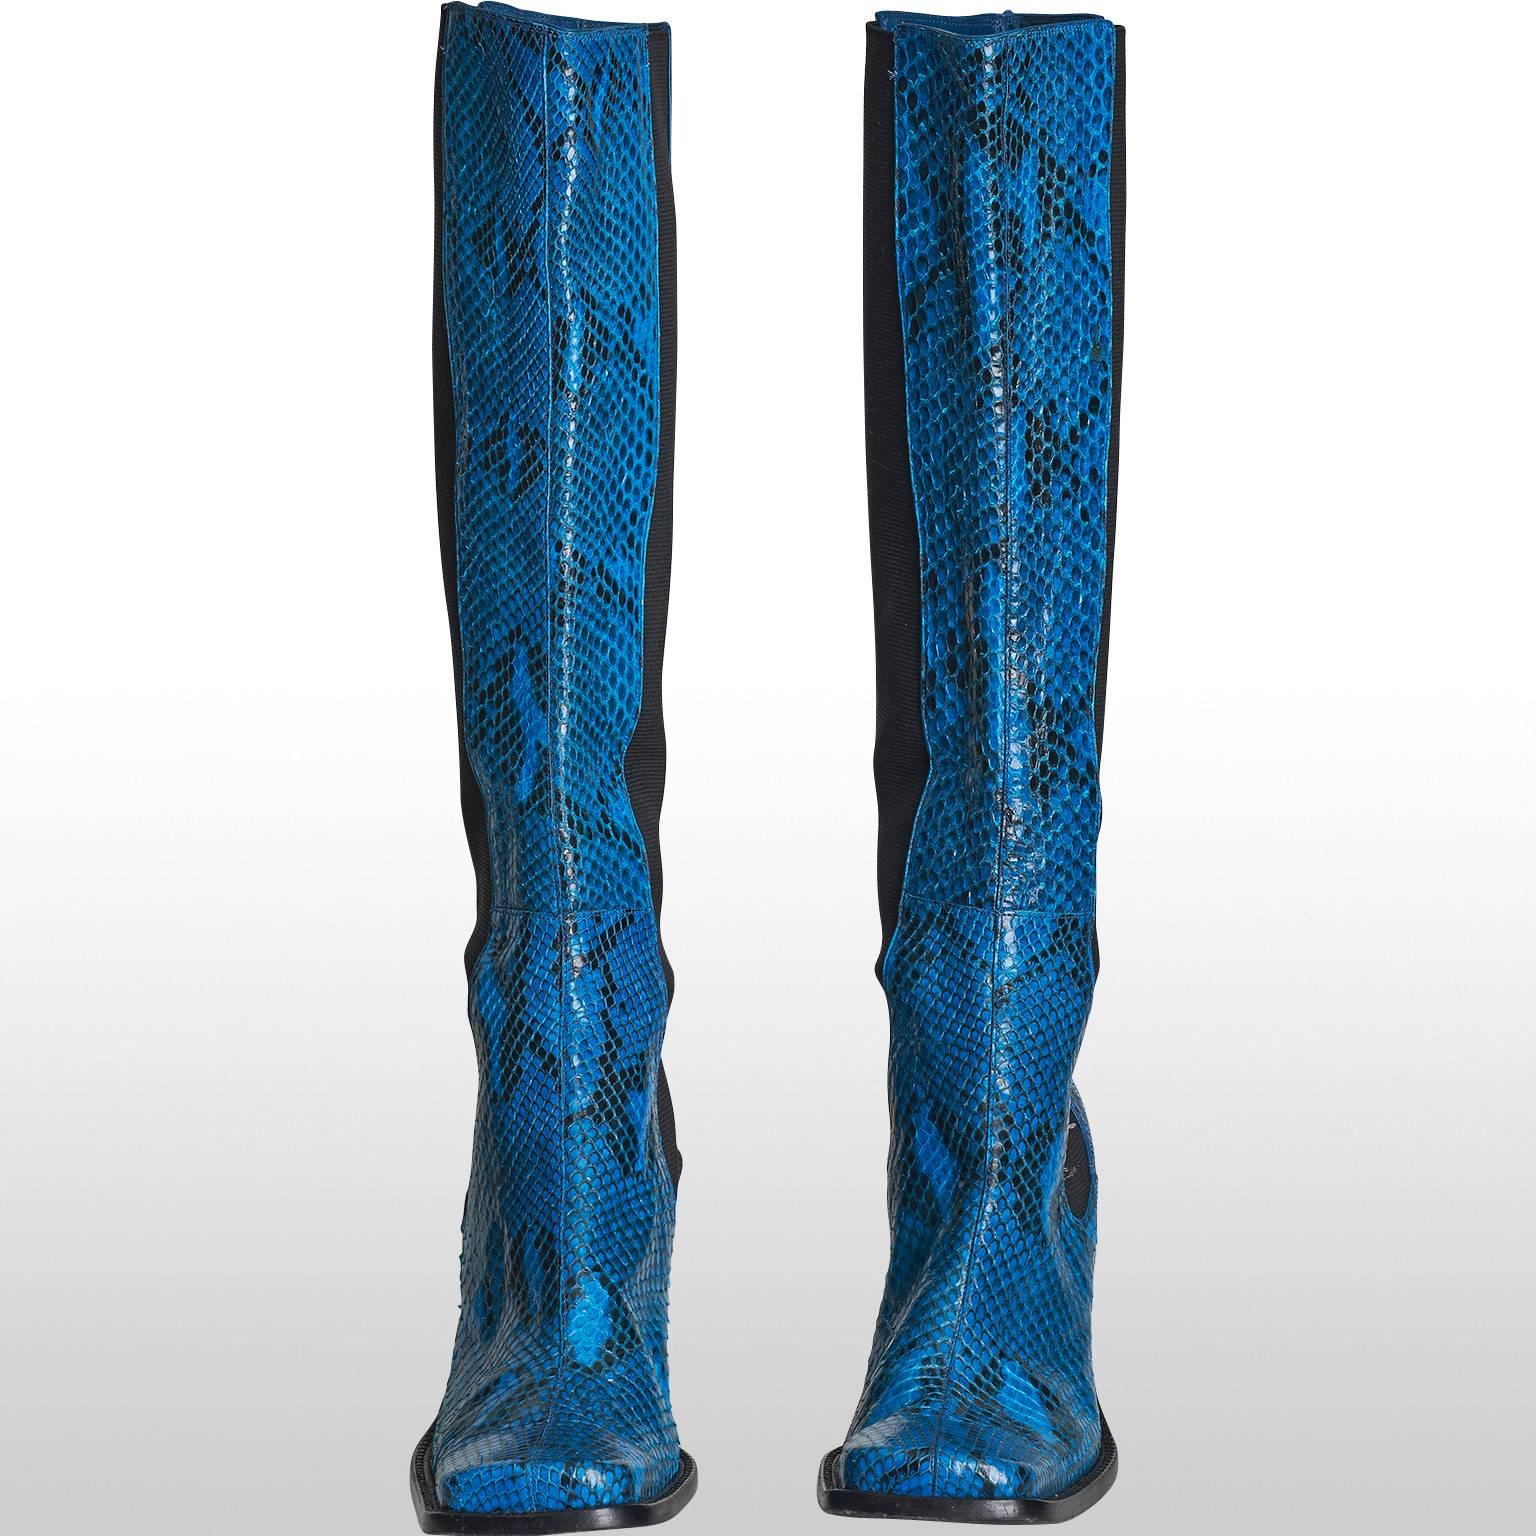 These showstopper boots by the design house Dolce and Gabbana features a vibrant blue and black 100% snakeskin print with squared toes and stiletto style heel. Stylish and sexy, these boots are perfect for those fashionistas who really want to stand